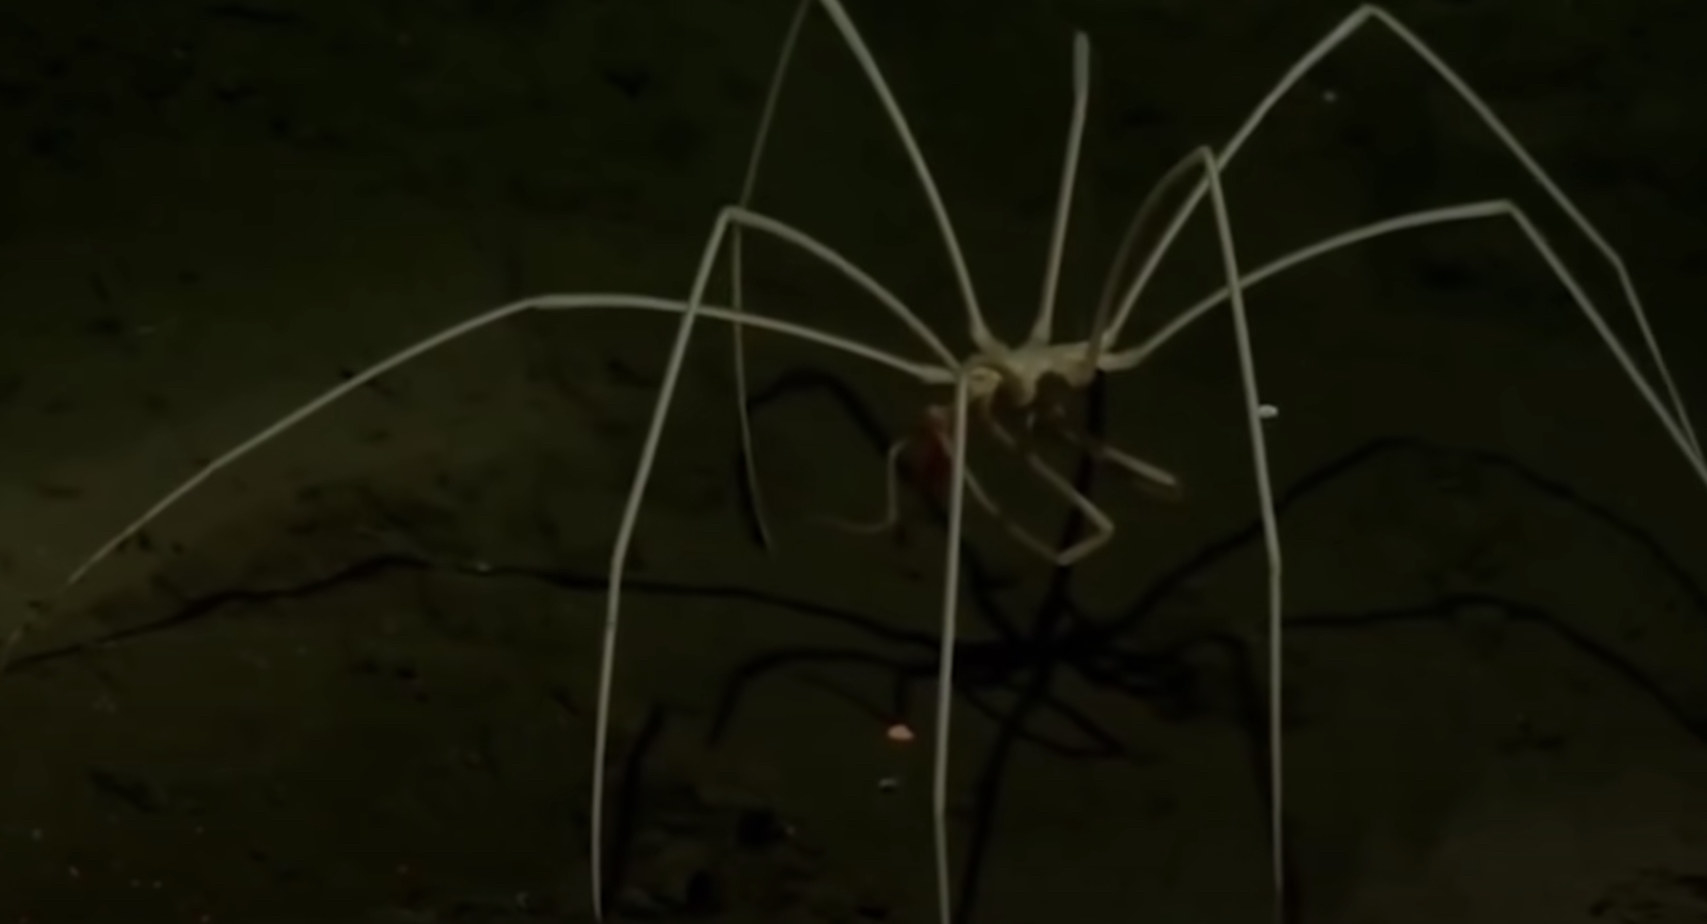 A light yellow sea spider with massive legs